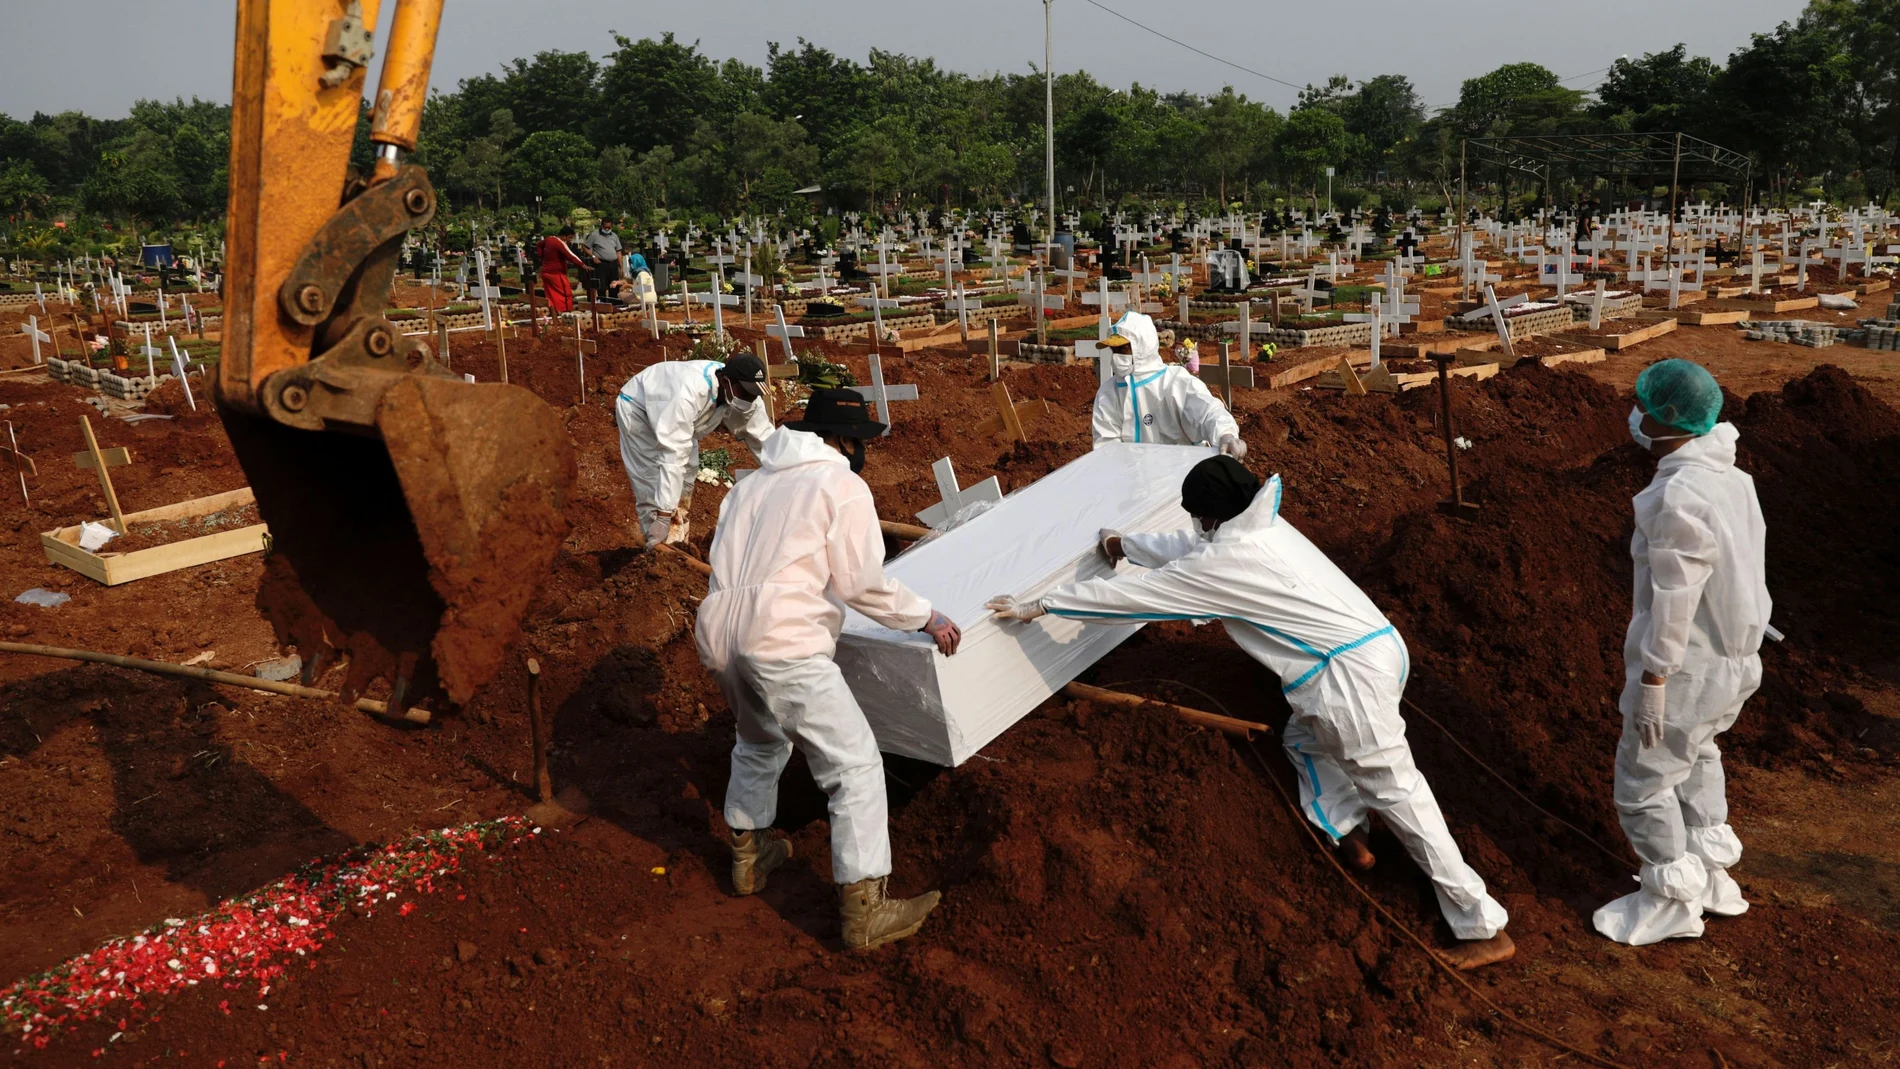 Workers wearing Personal Protective Equipments (PPE) burry the coffin of 72-year-old man who passed away due to coronavirus disease (COVID-19) at a burial area provided by the government for COVID-19 victims as the case surges, in Bekasi, on the outskirts of Jakarta, Indonesia, July 15, 2021. REUTERS/Willy Kurniawan